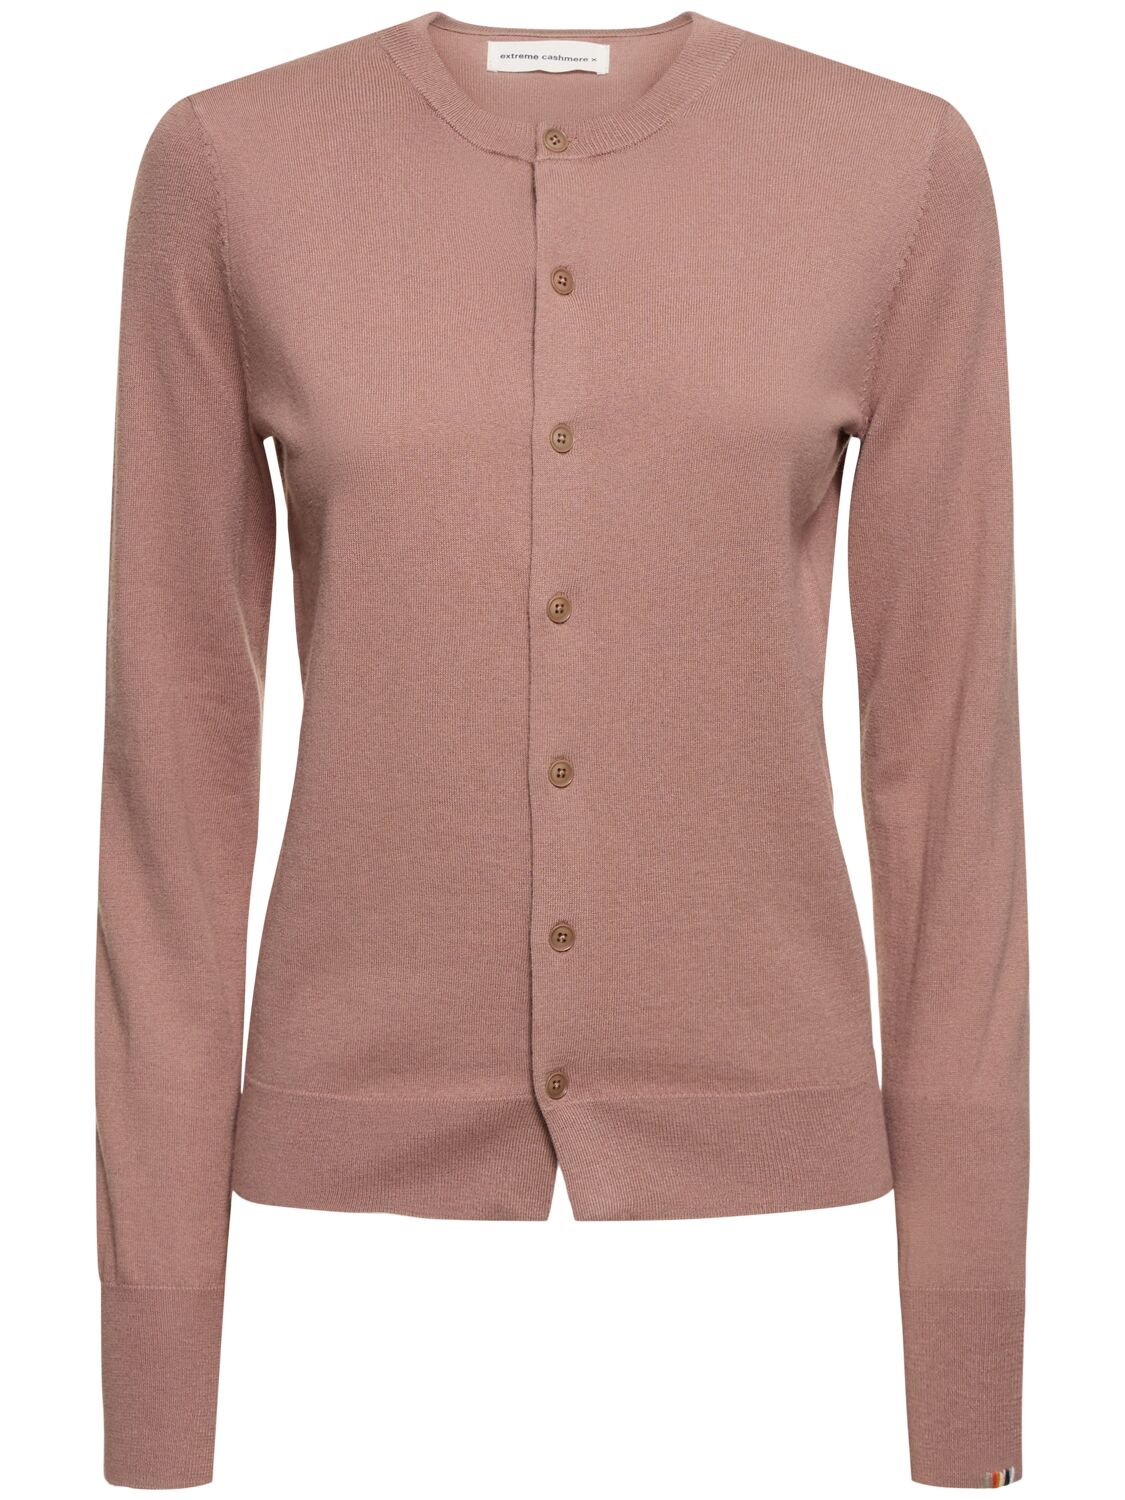 Extreme Cashmere A Little Bit Cotton & Cashmere Cardigan In Pink